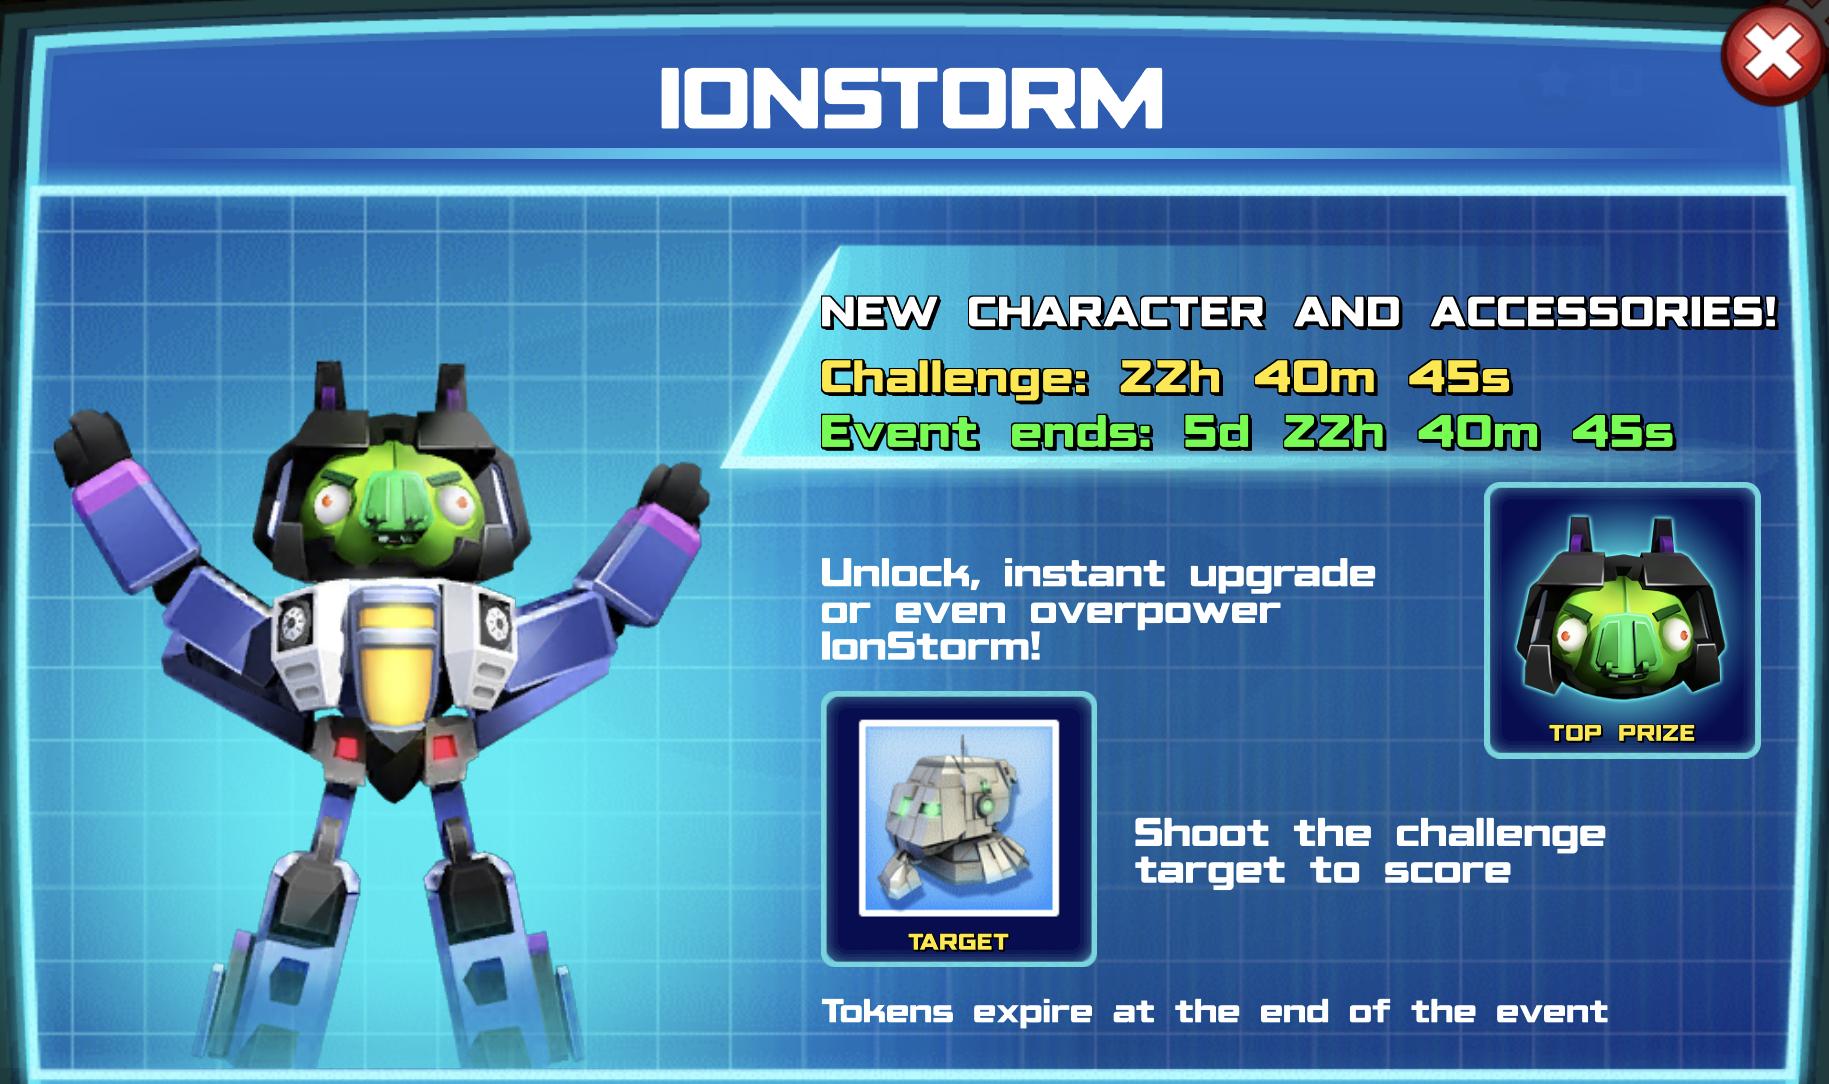 The banner for Ionstorm event